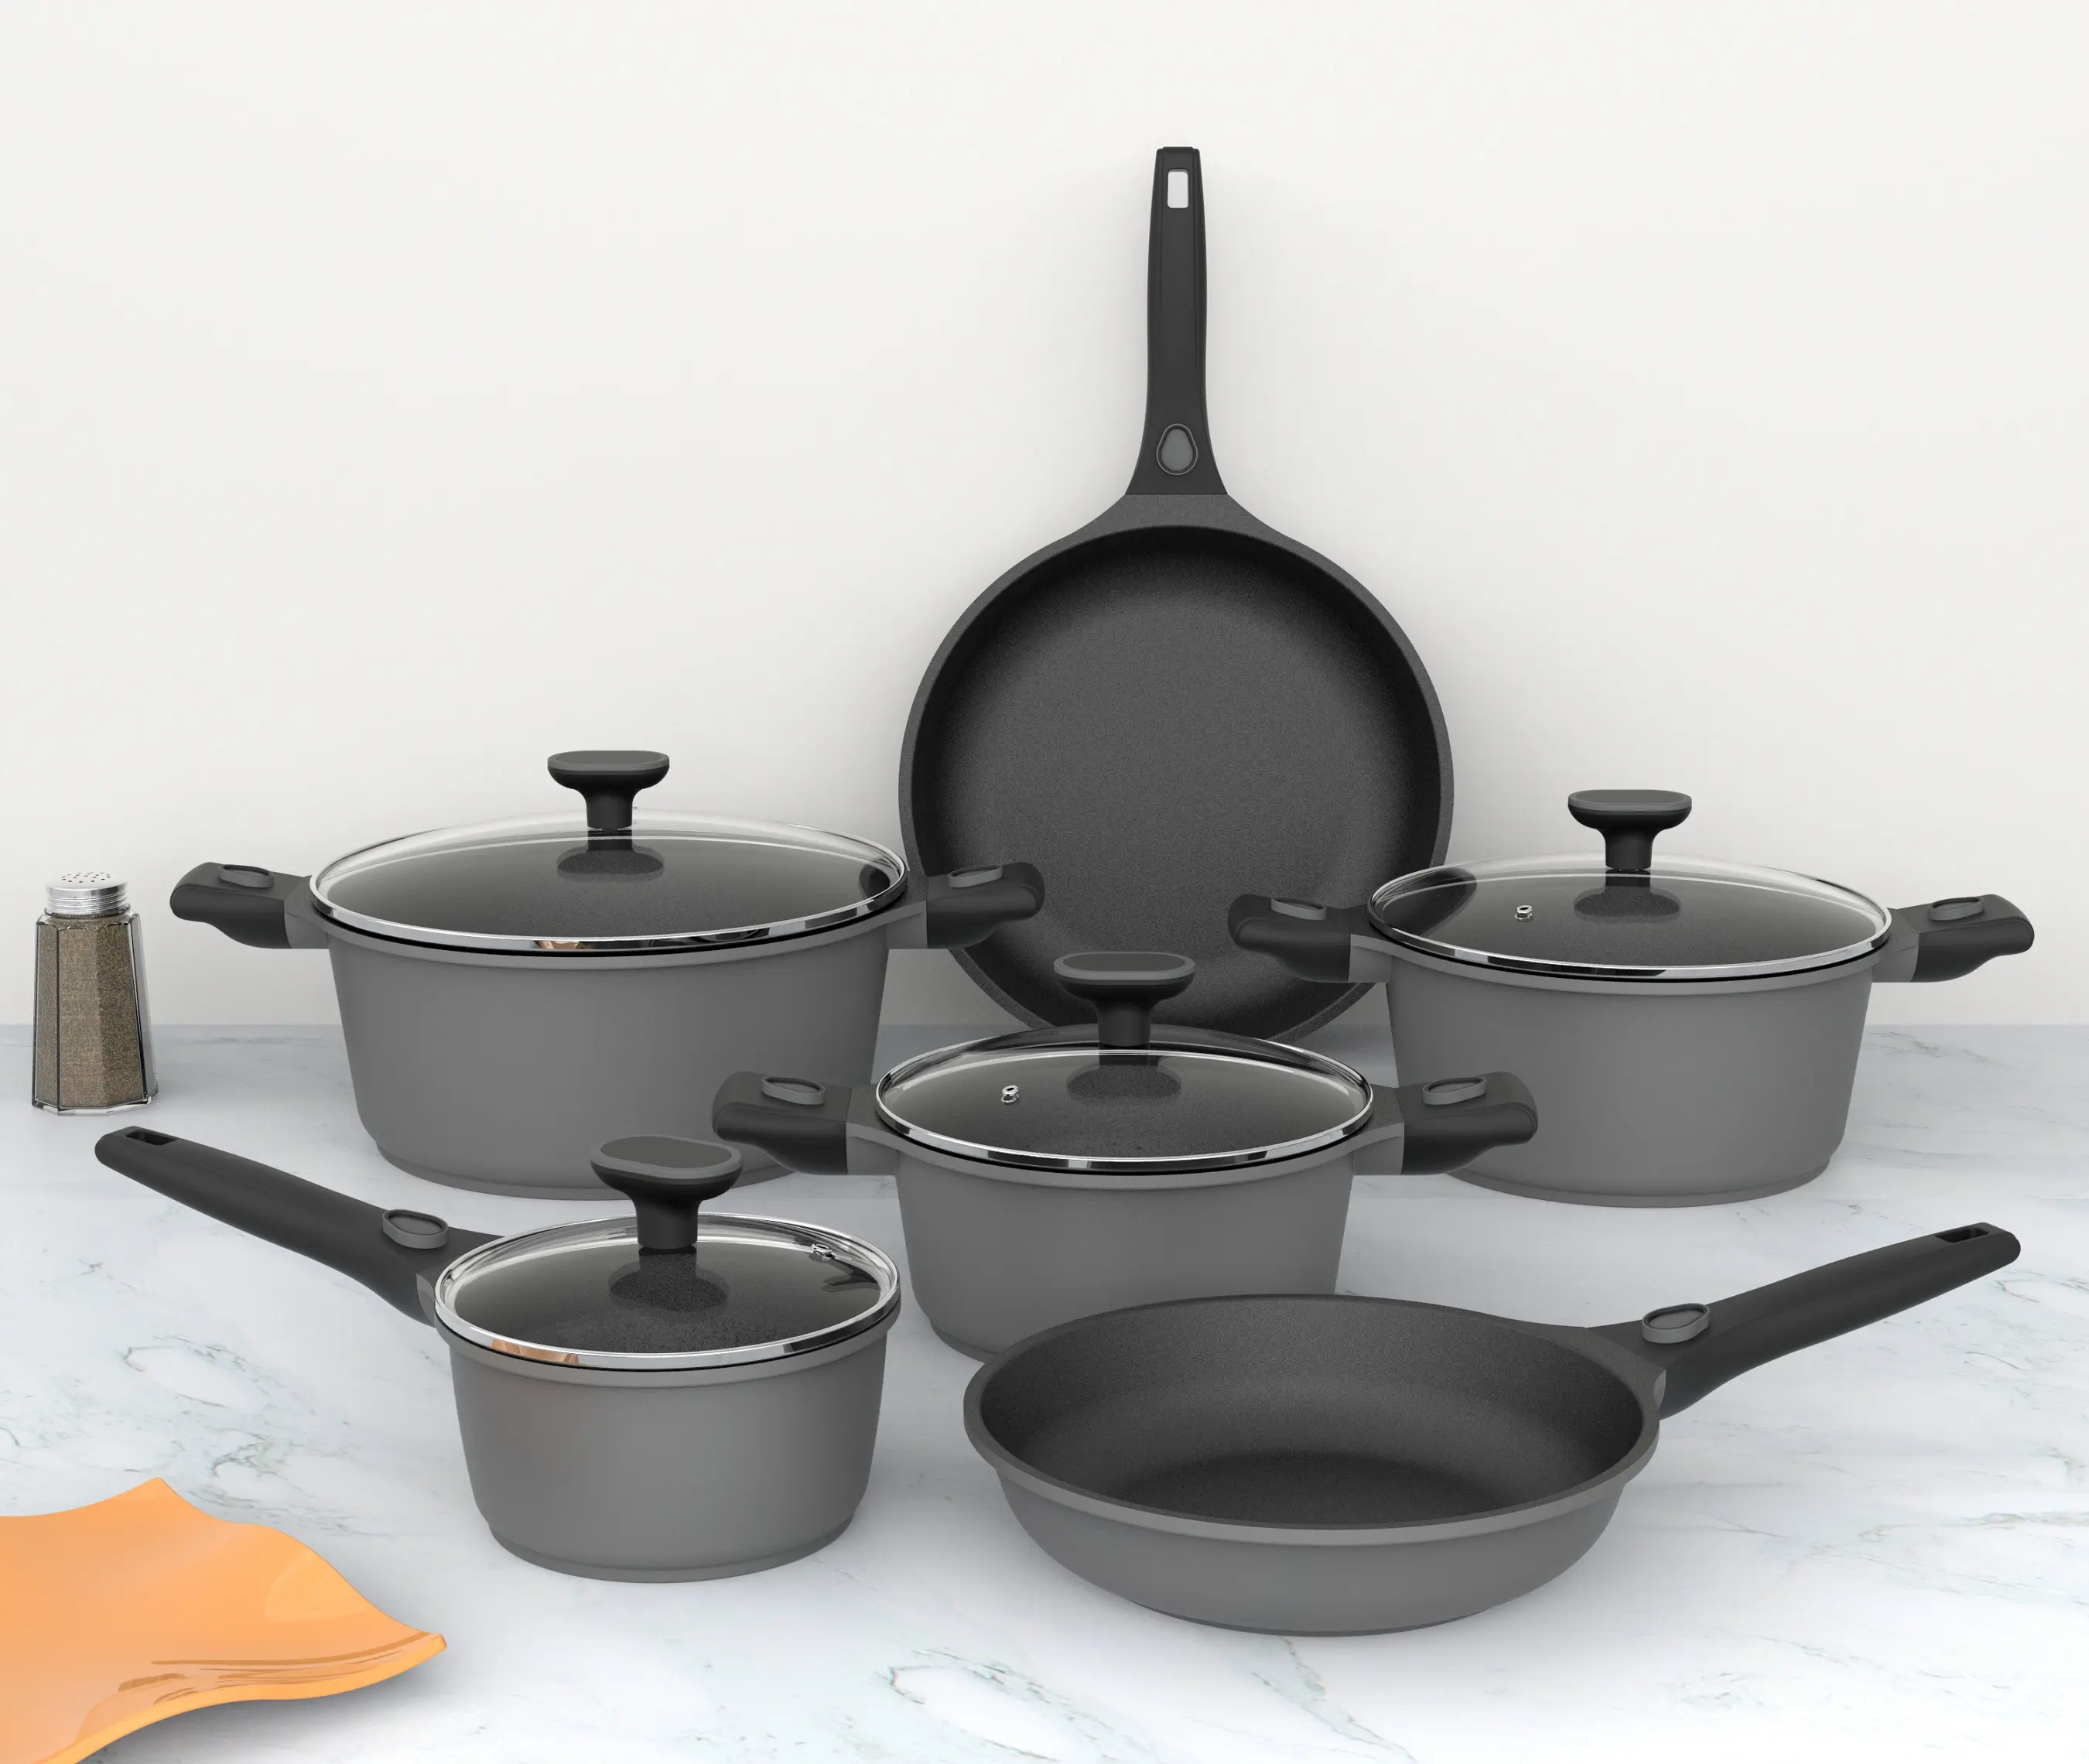 Factory Directly Kitchen Nonstick Aluminum Cookware Sets 10 pieces, PFOA Free Cooking Set